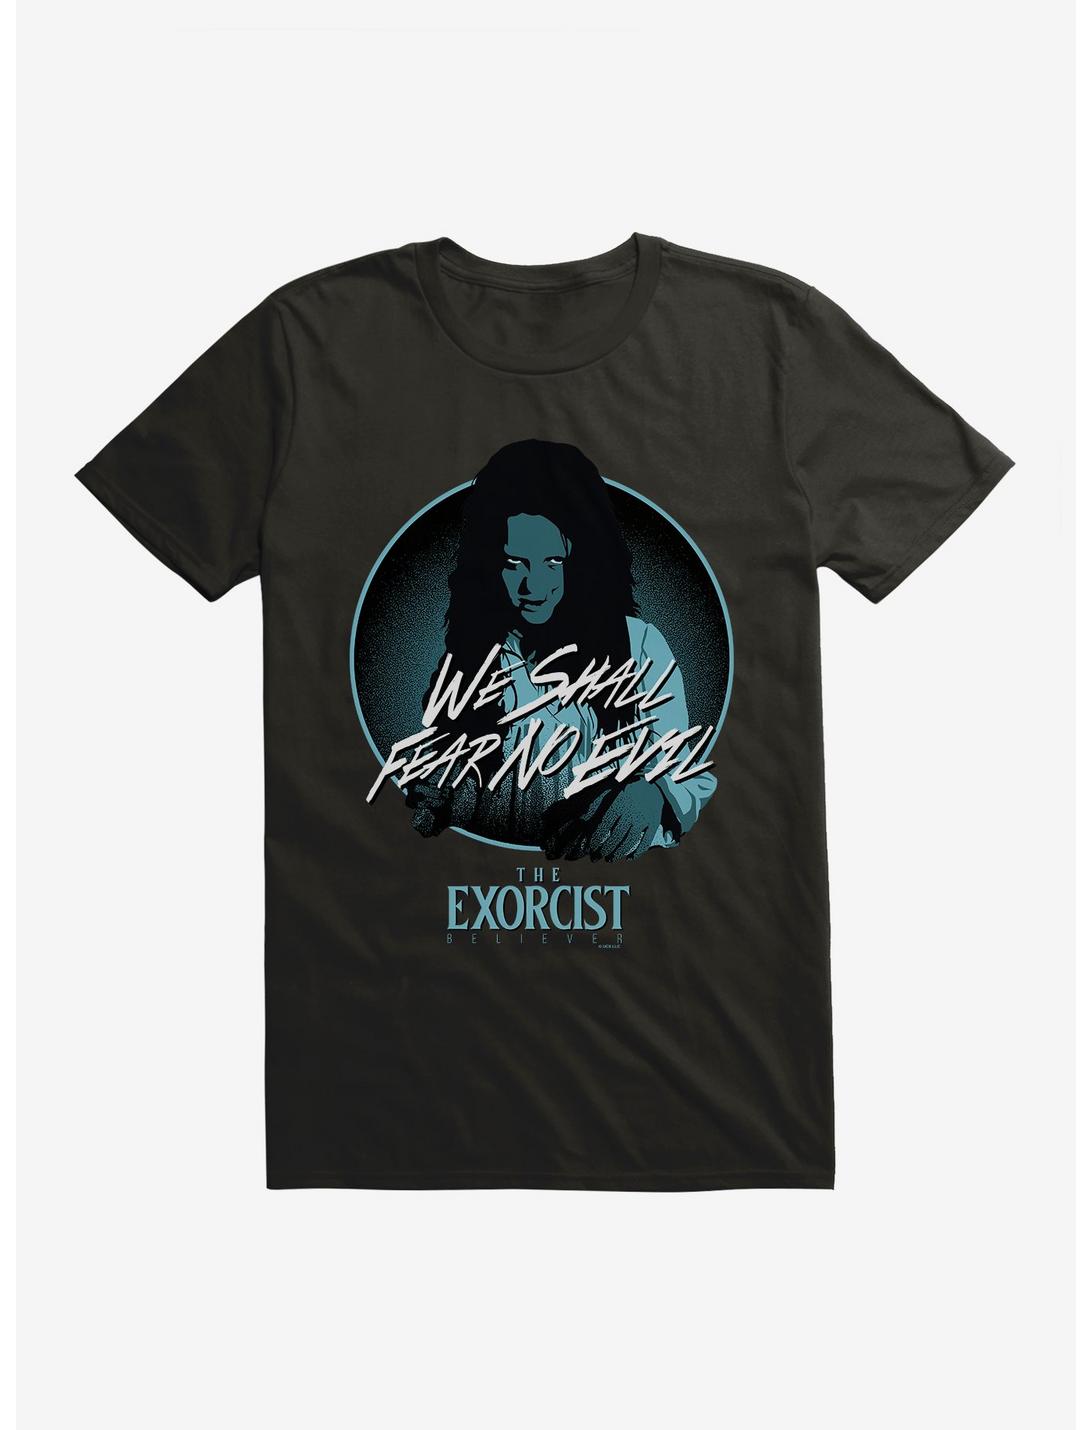 The Exorcist Believer We Shall Fear No Evil T-Shirt, BLACK, hi-res